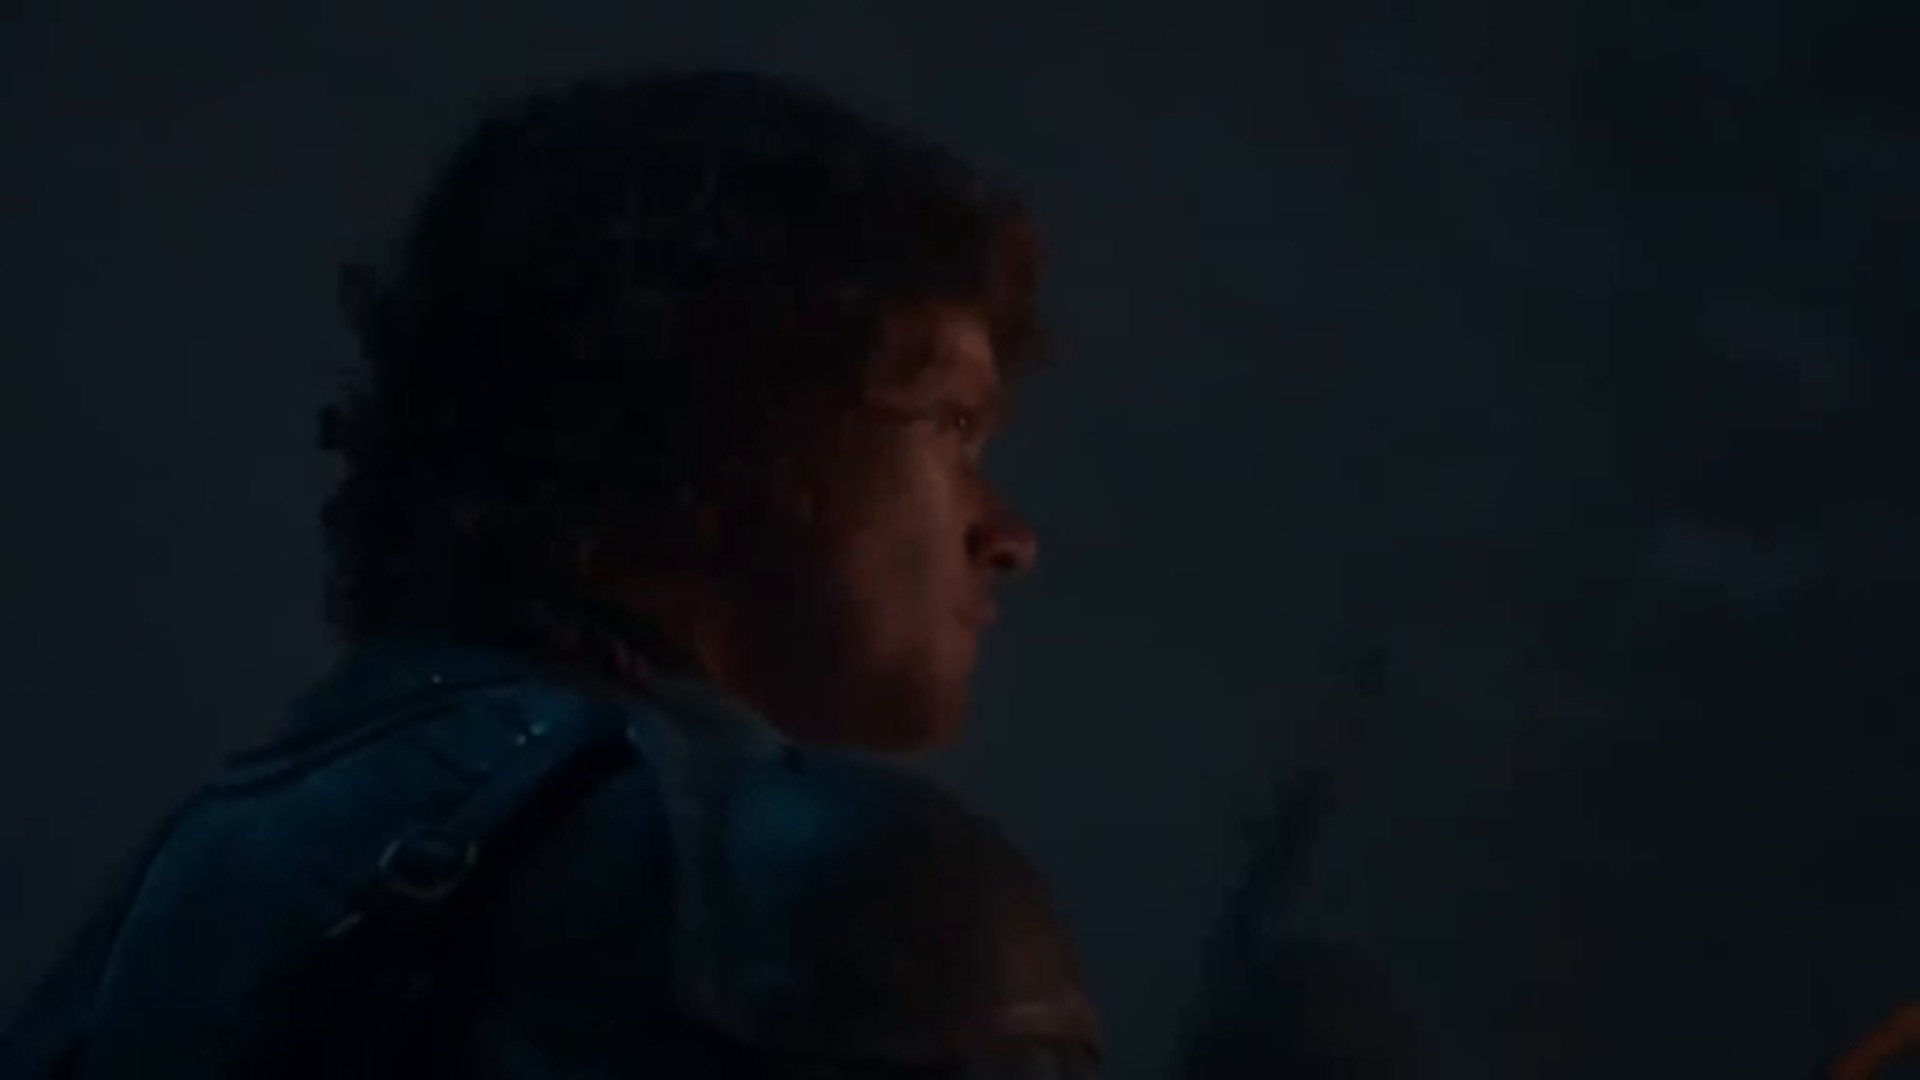 Deleted Scene From ‘Game of Thrones’ Season 8